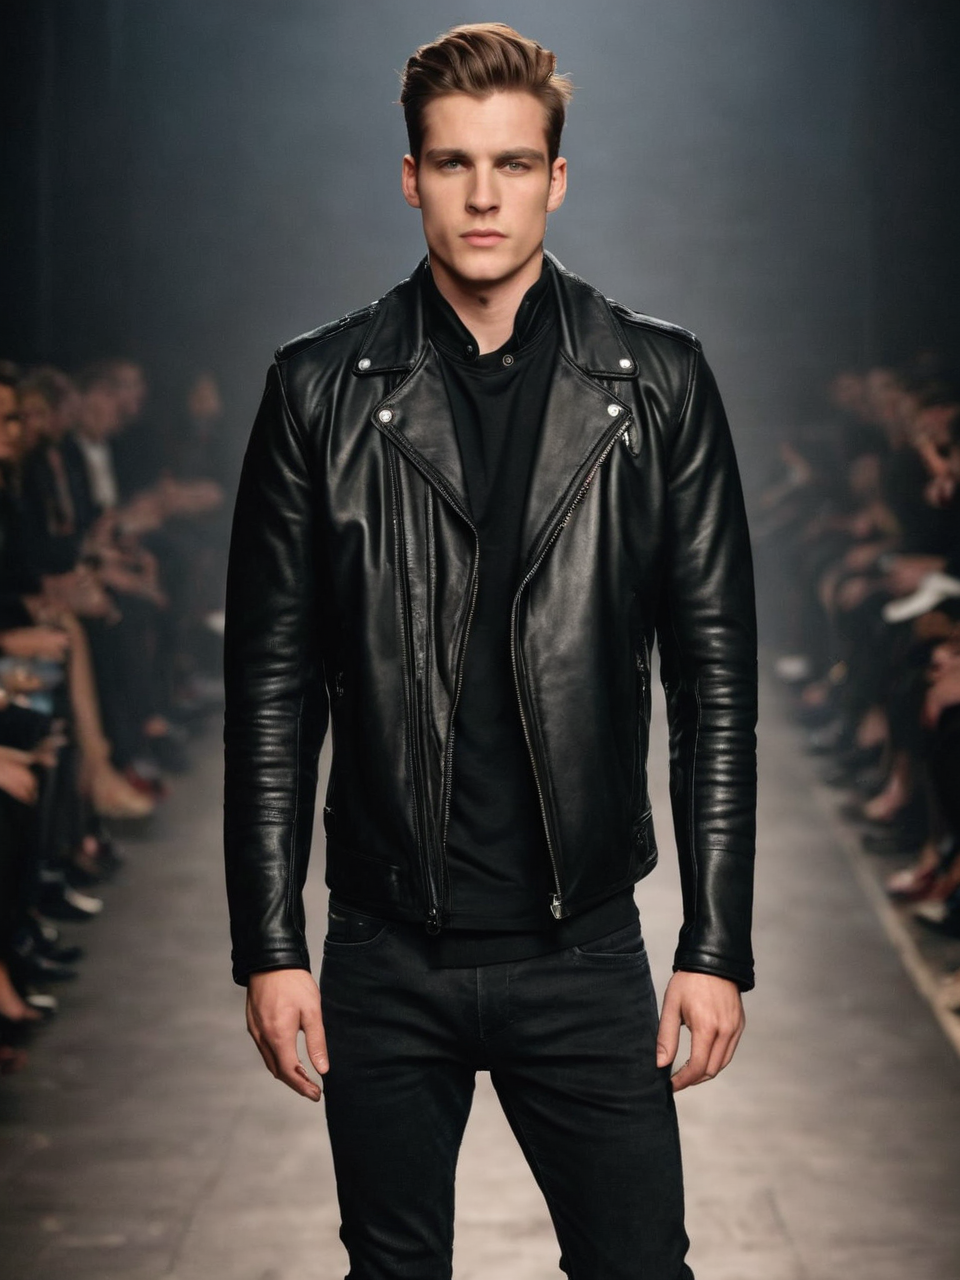 The Fillmore Mens Leather Motorcycle Jacket